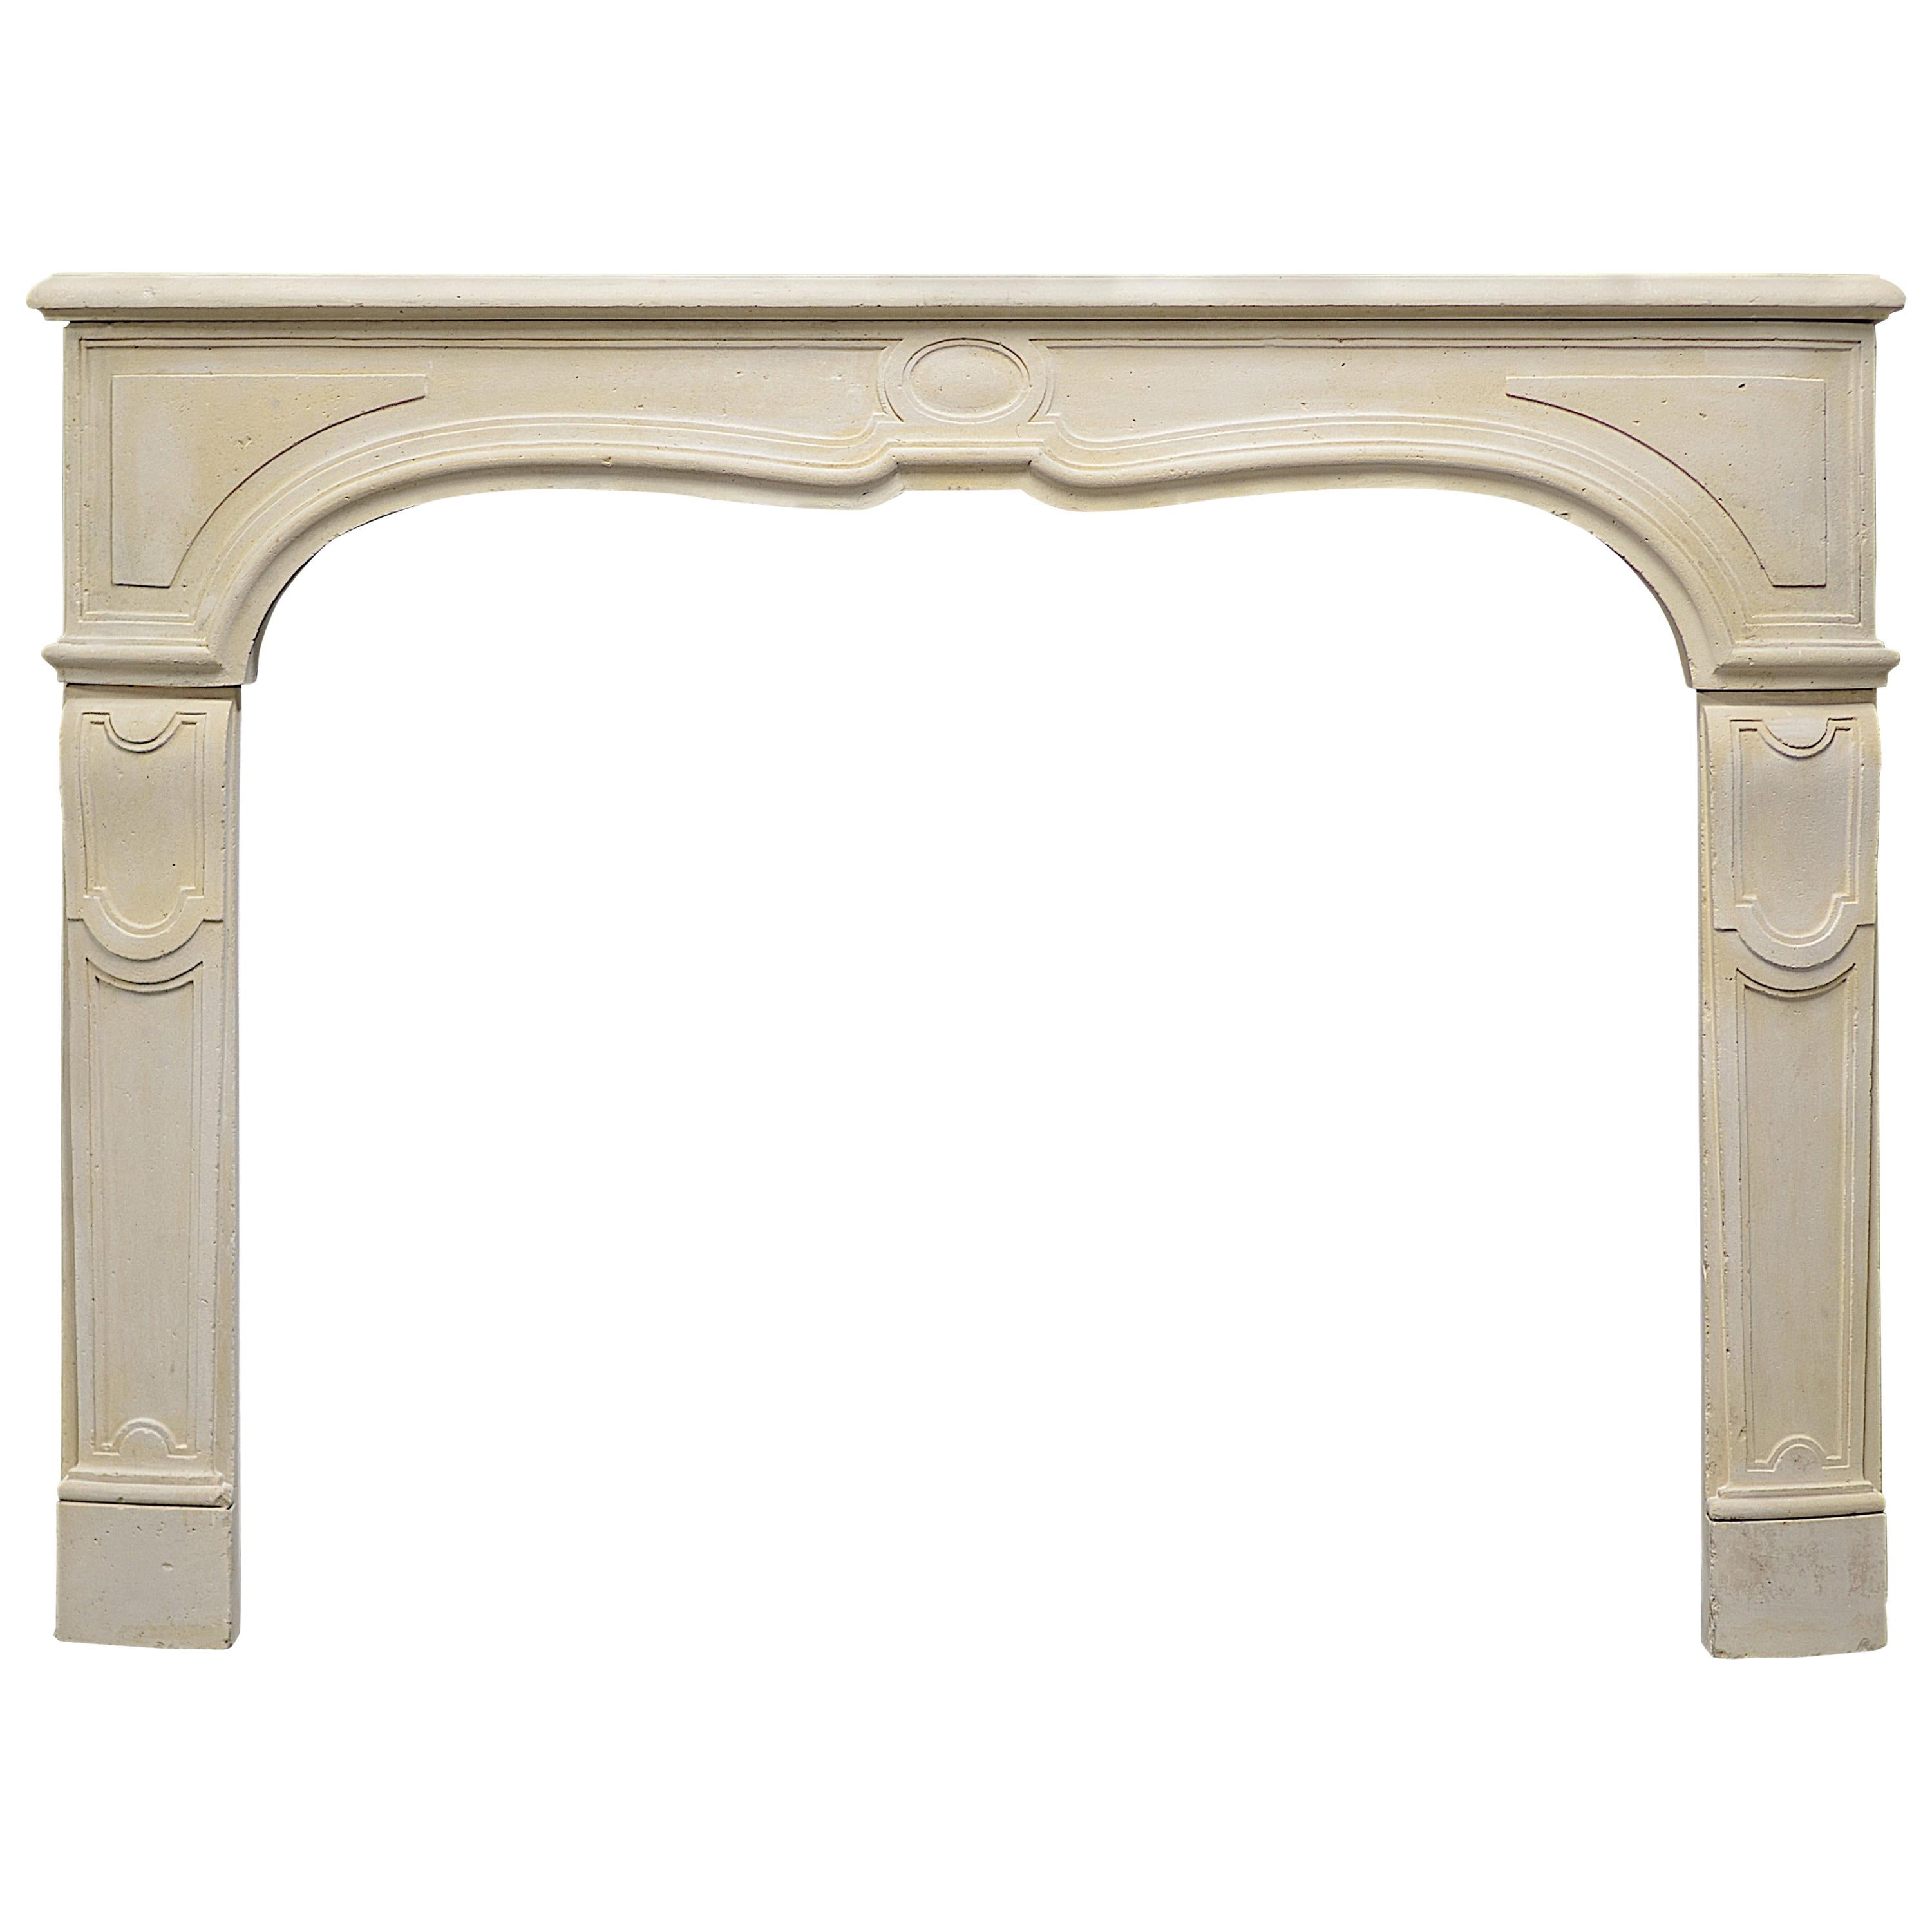 Nice French Louis XV Fireplace Mantel For Sale